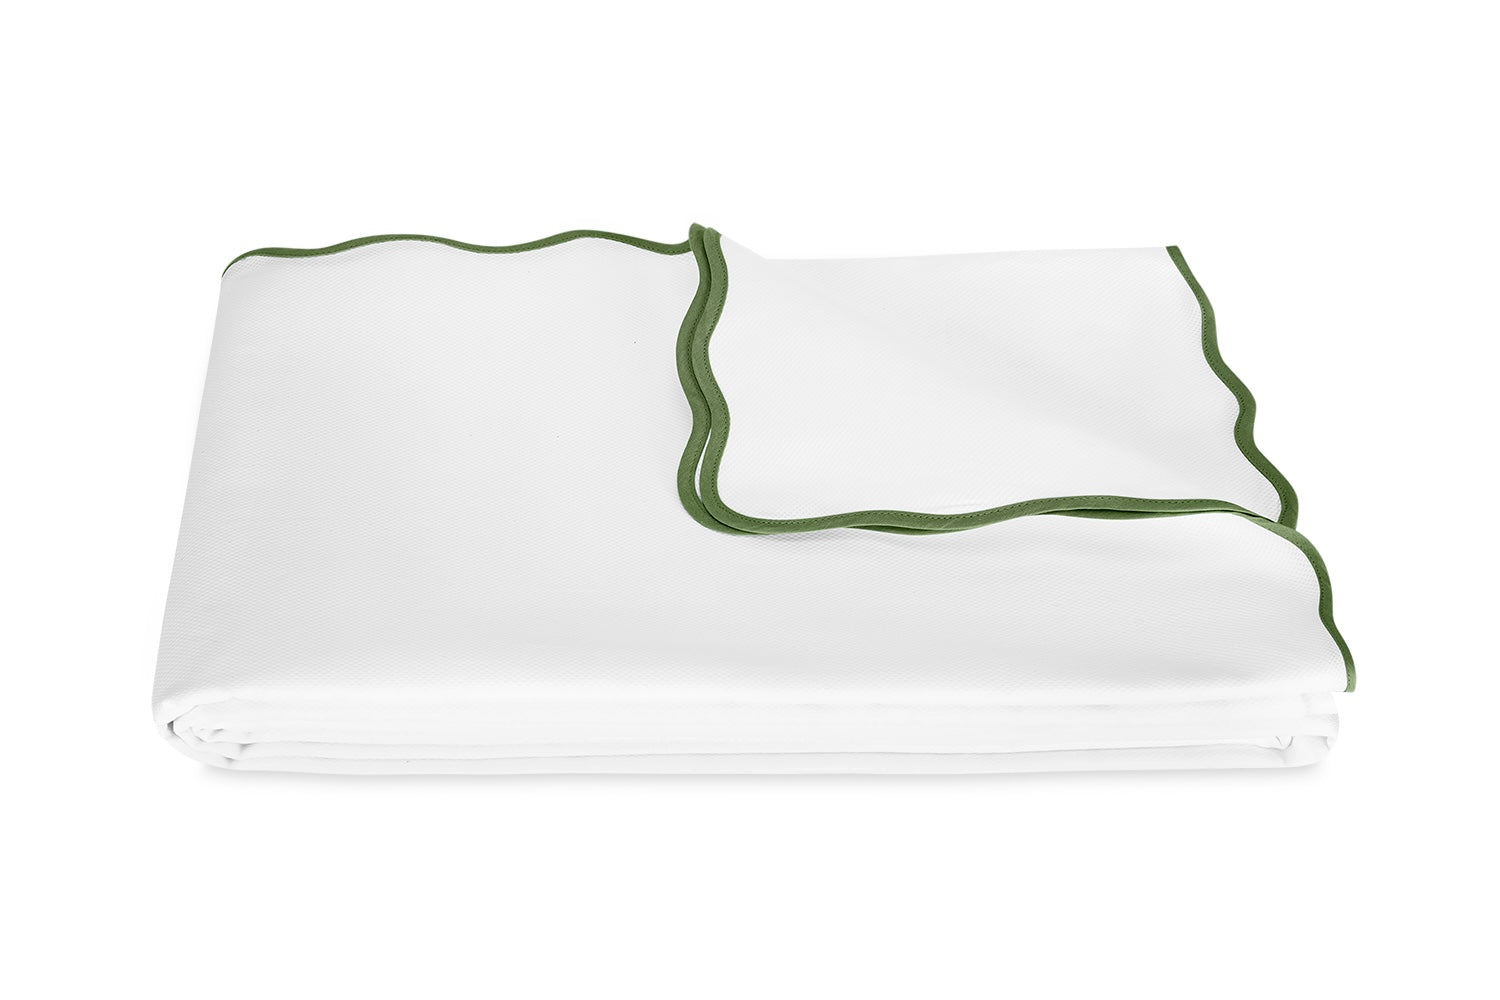 Coverlet - Matouk Camila Pique Palm Green Blanket Cover at Fig Linens and Home